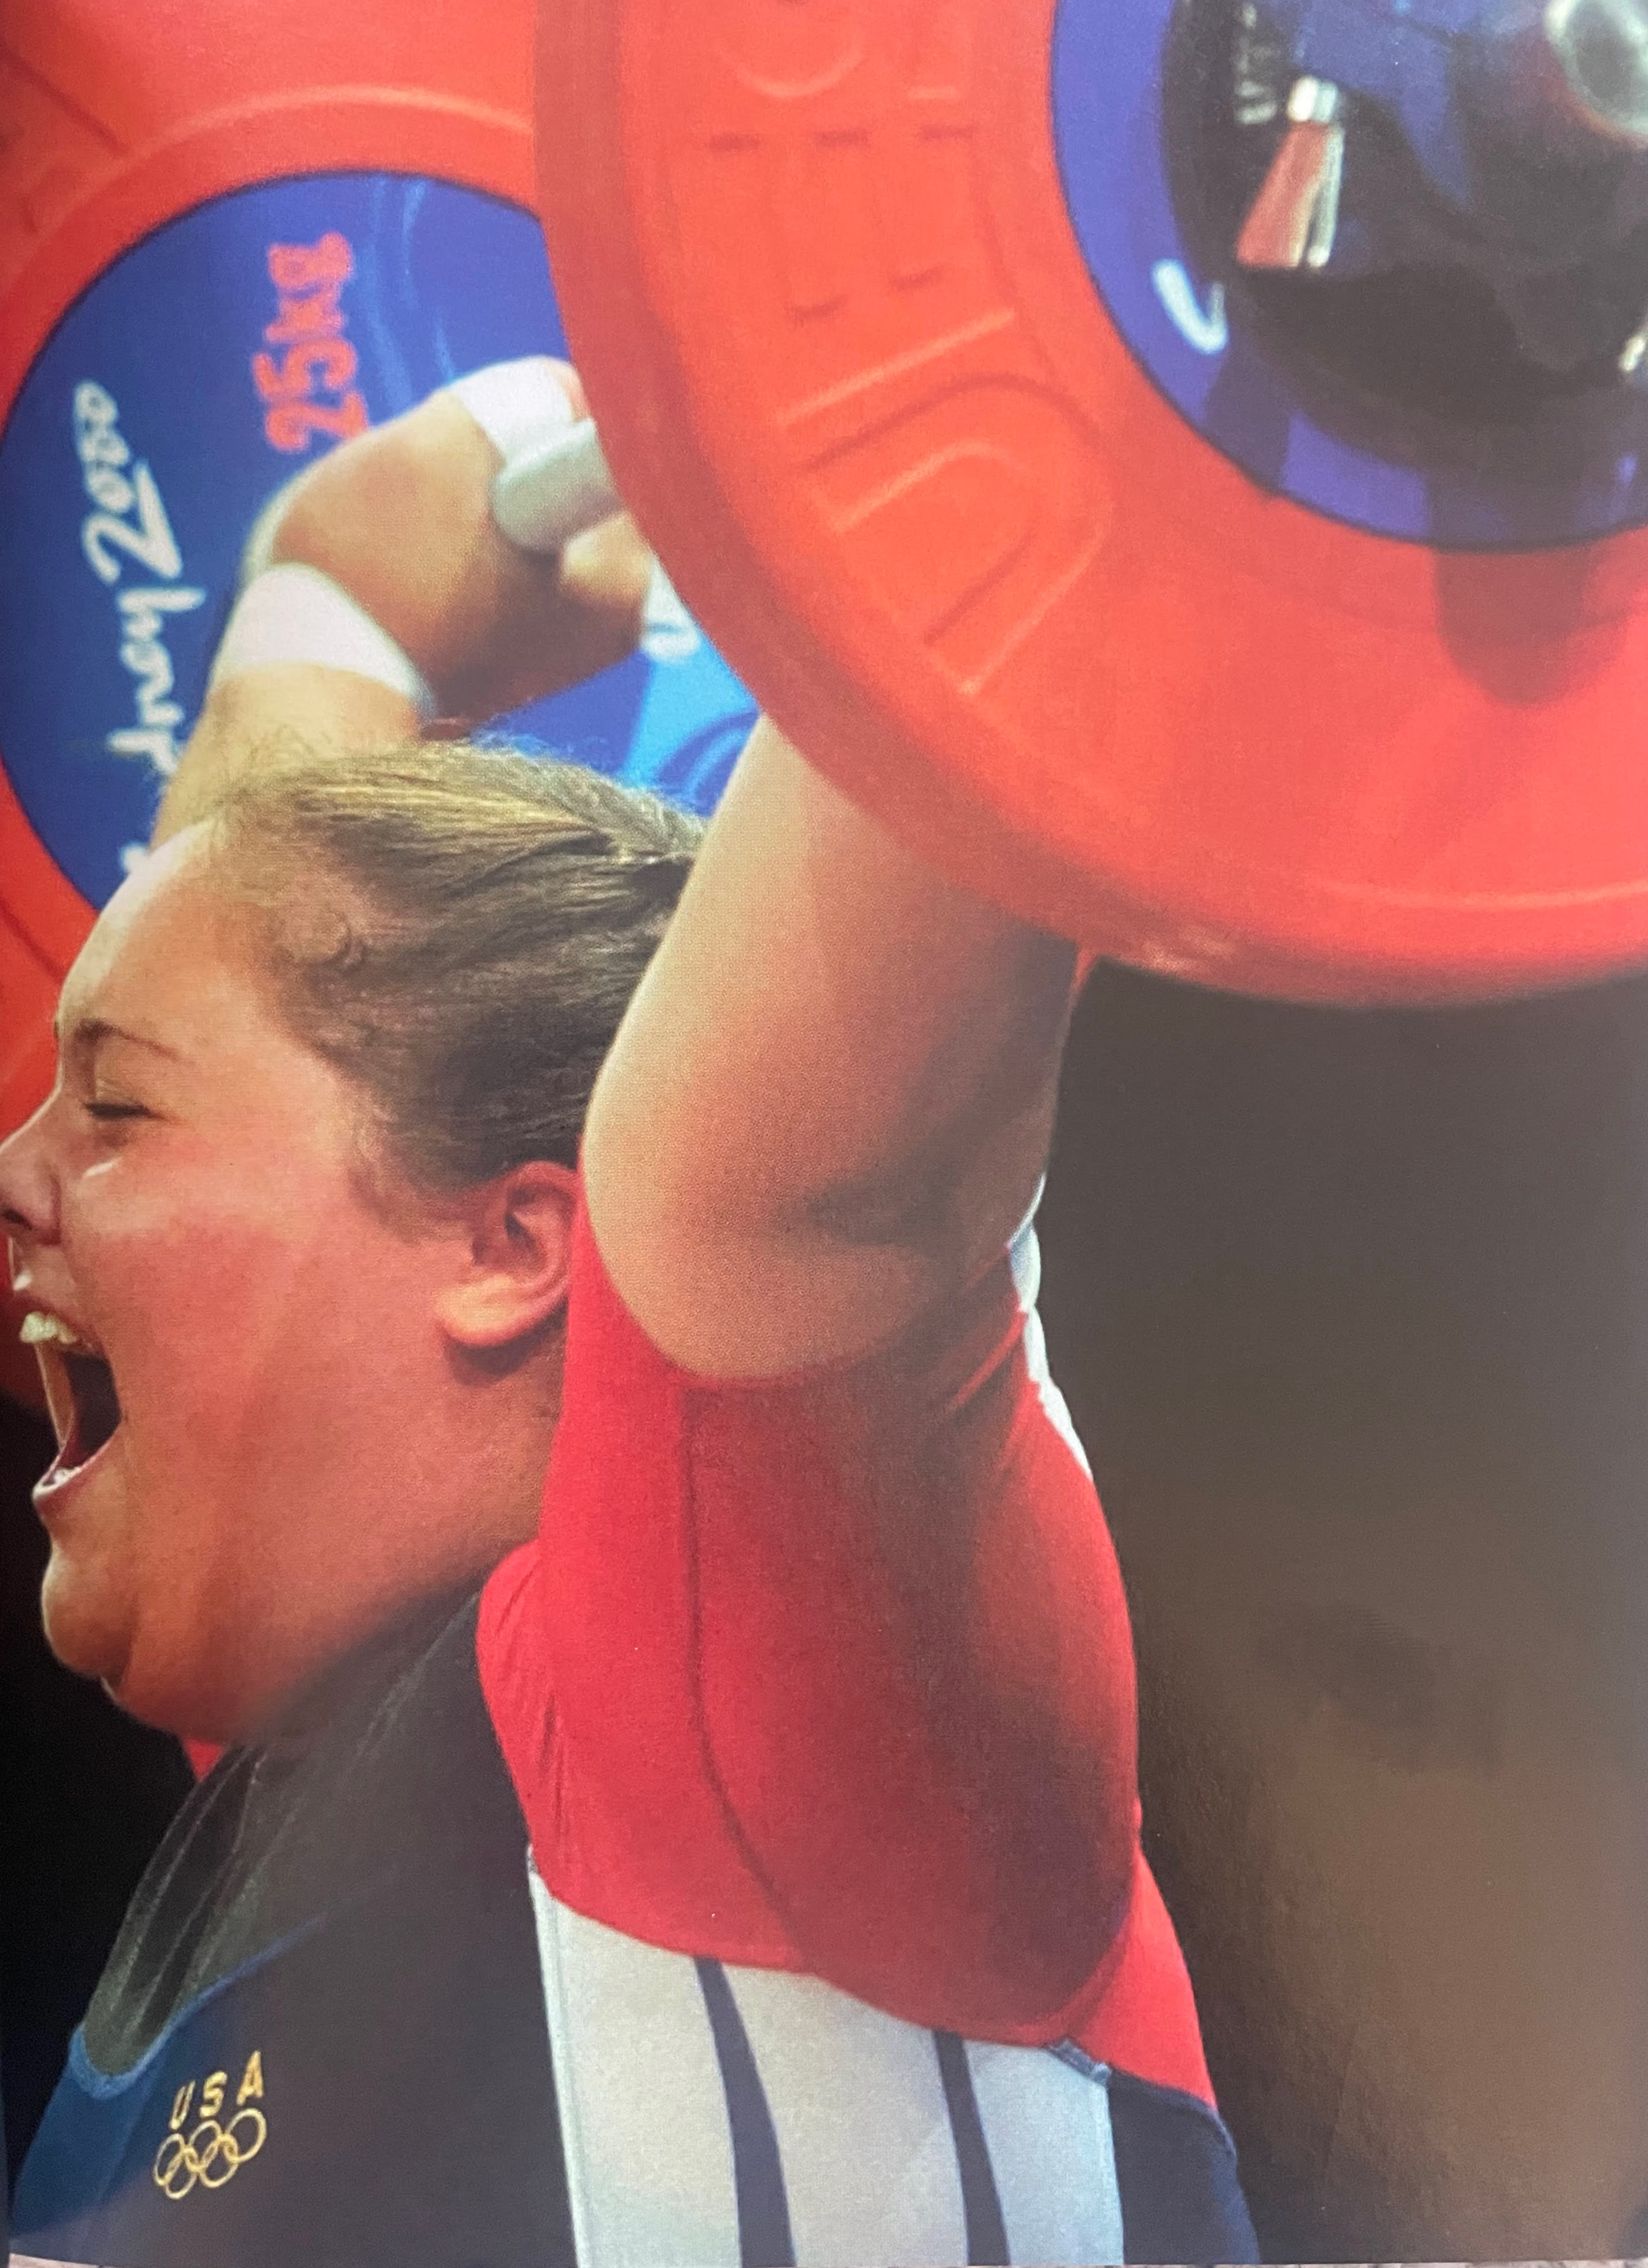 After Cheryl Haworth won bronze at the Sydney Olympics, SI Women featured her in a full page photo in the November/December 2000 issue. Haworth still retains the title of heaviest snatch by an American woman, lifting 128 kg at the 2003 USA National Championships.